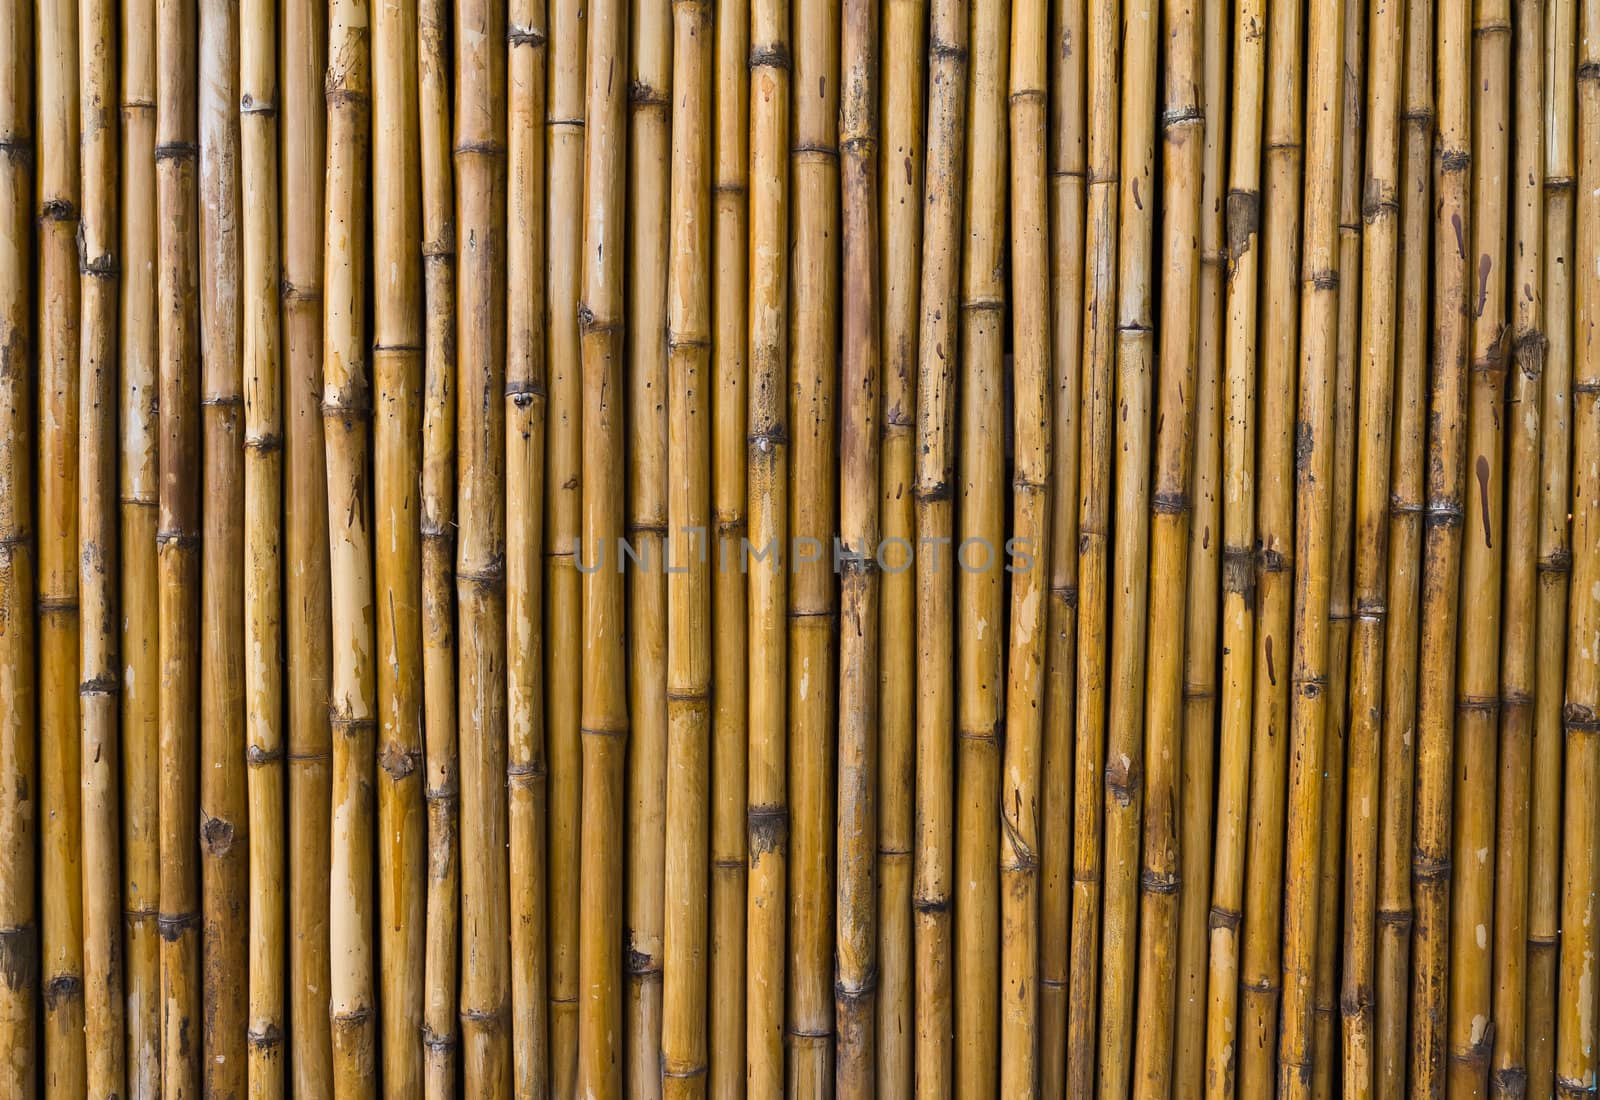 Bamboo walls. by Na8011seeiN